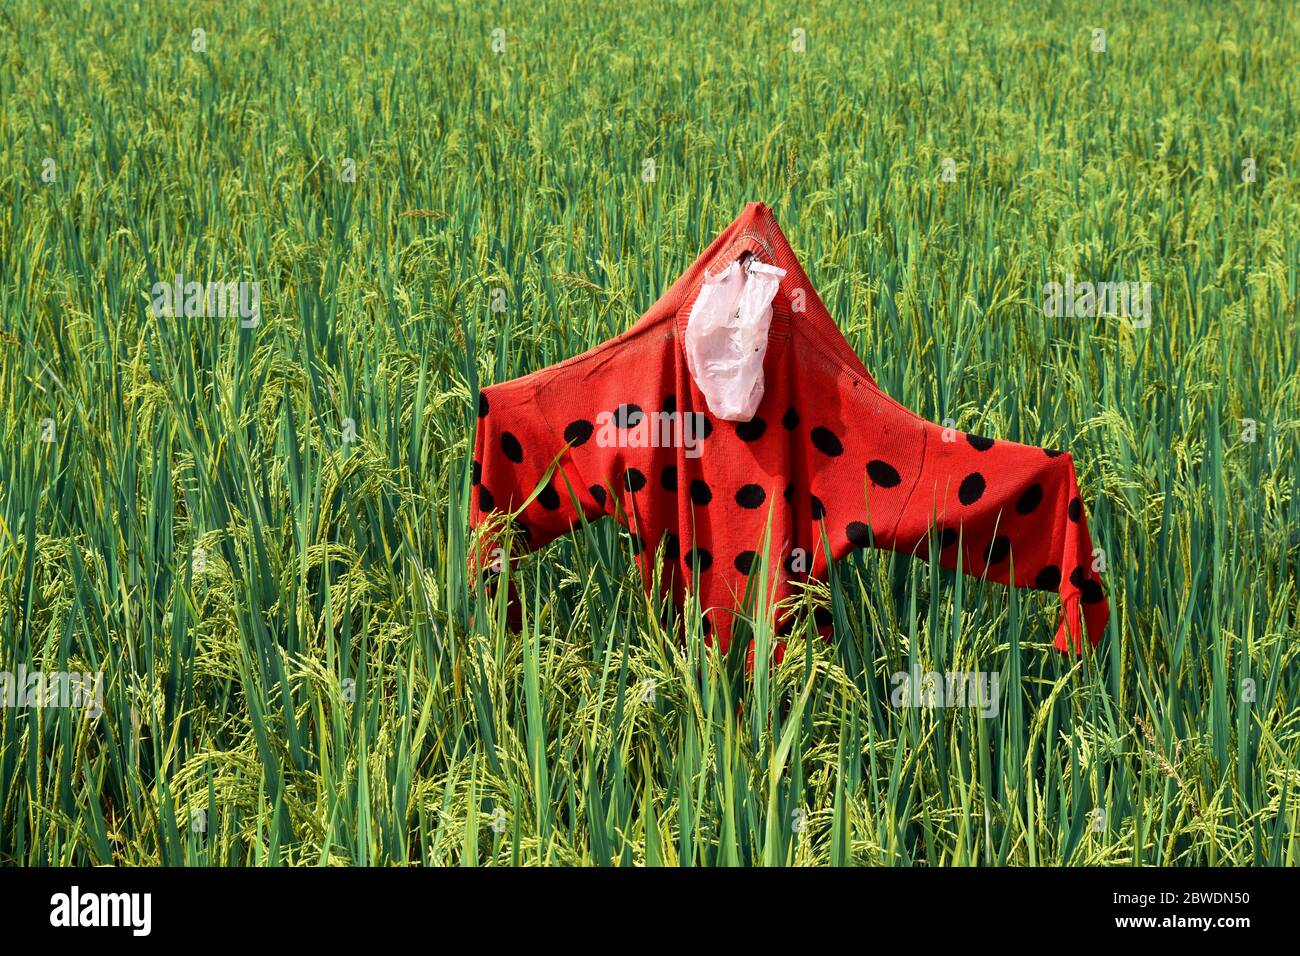 Cuckoo is a traditional object in Asia. Red Scarecrow in Green paddy nature. Bangladeshi flag concept combined on Green and red color. Stock Photo